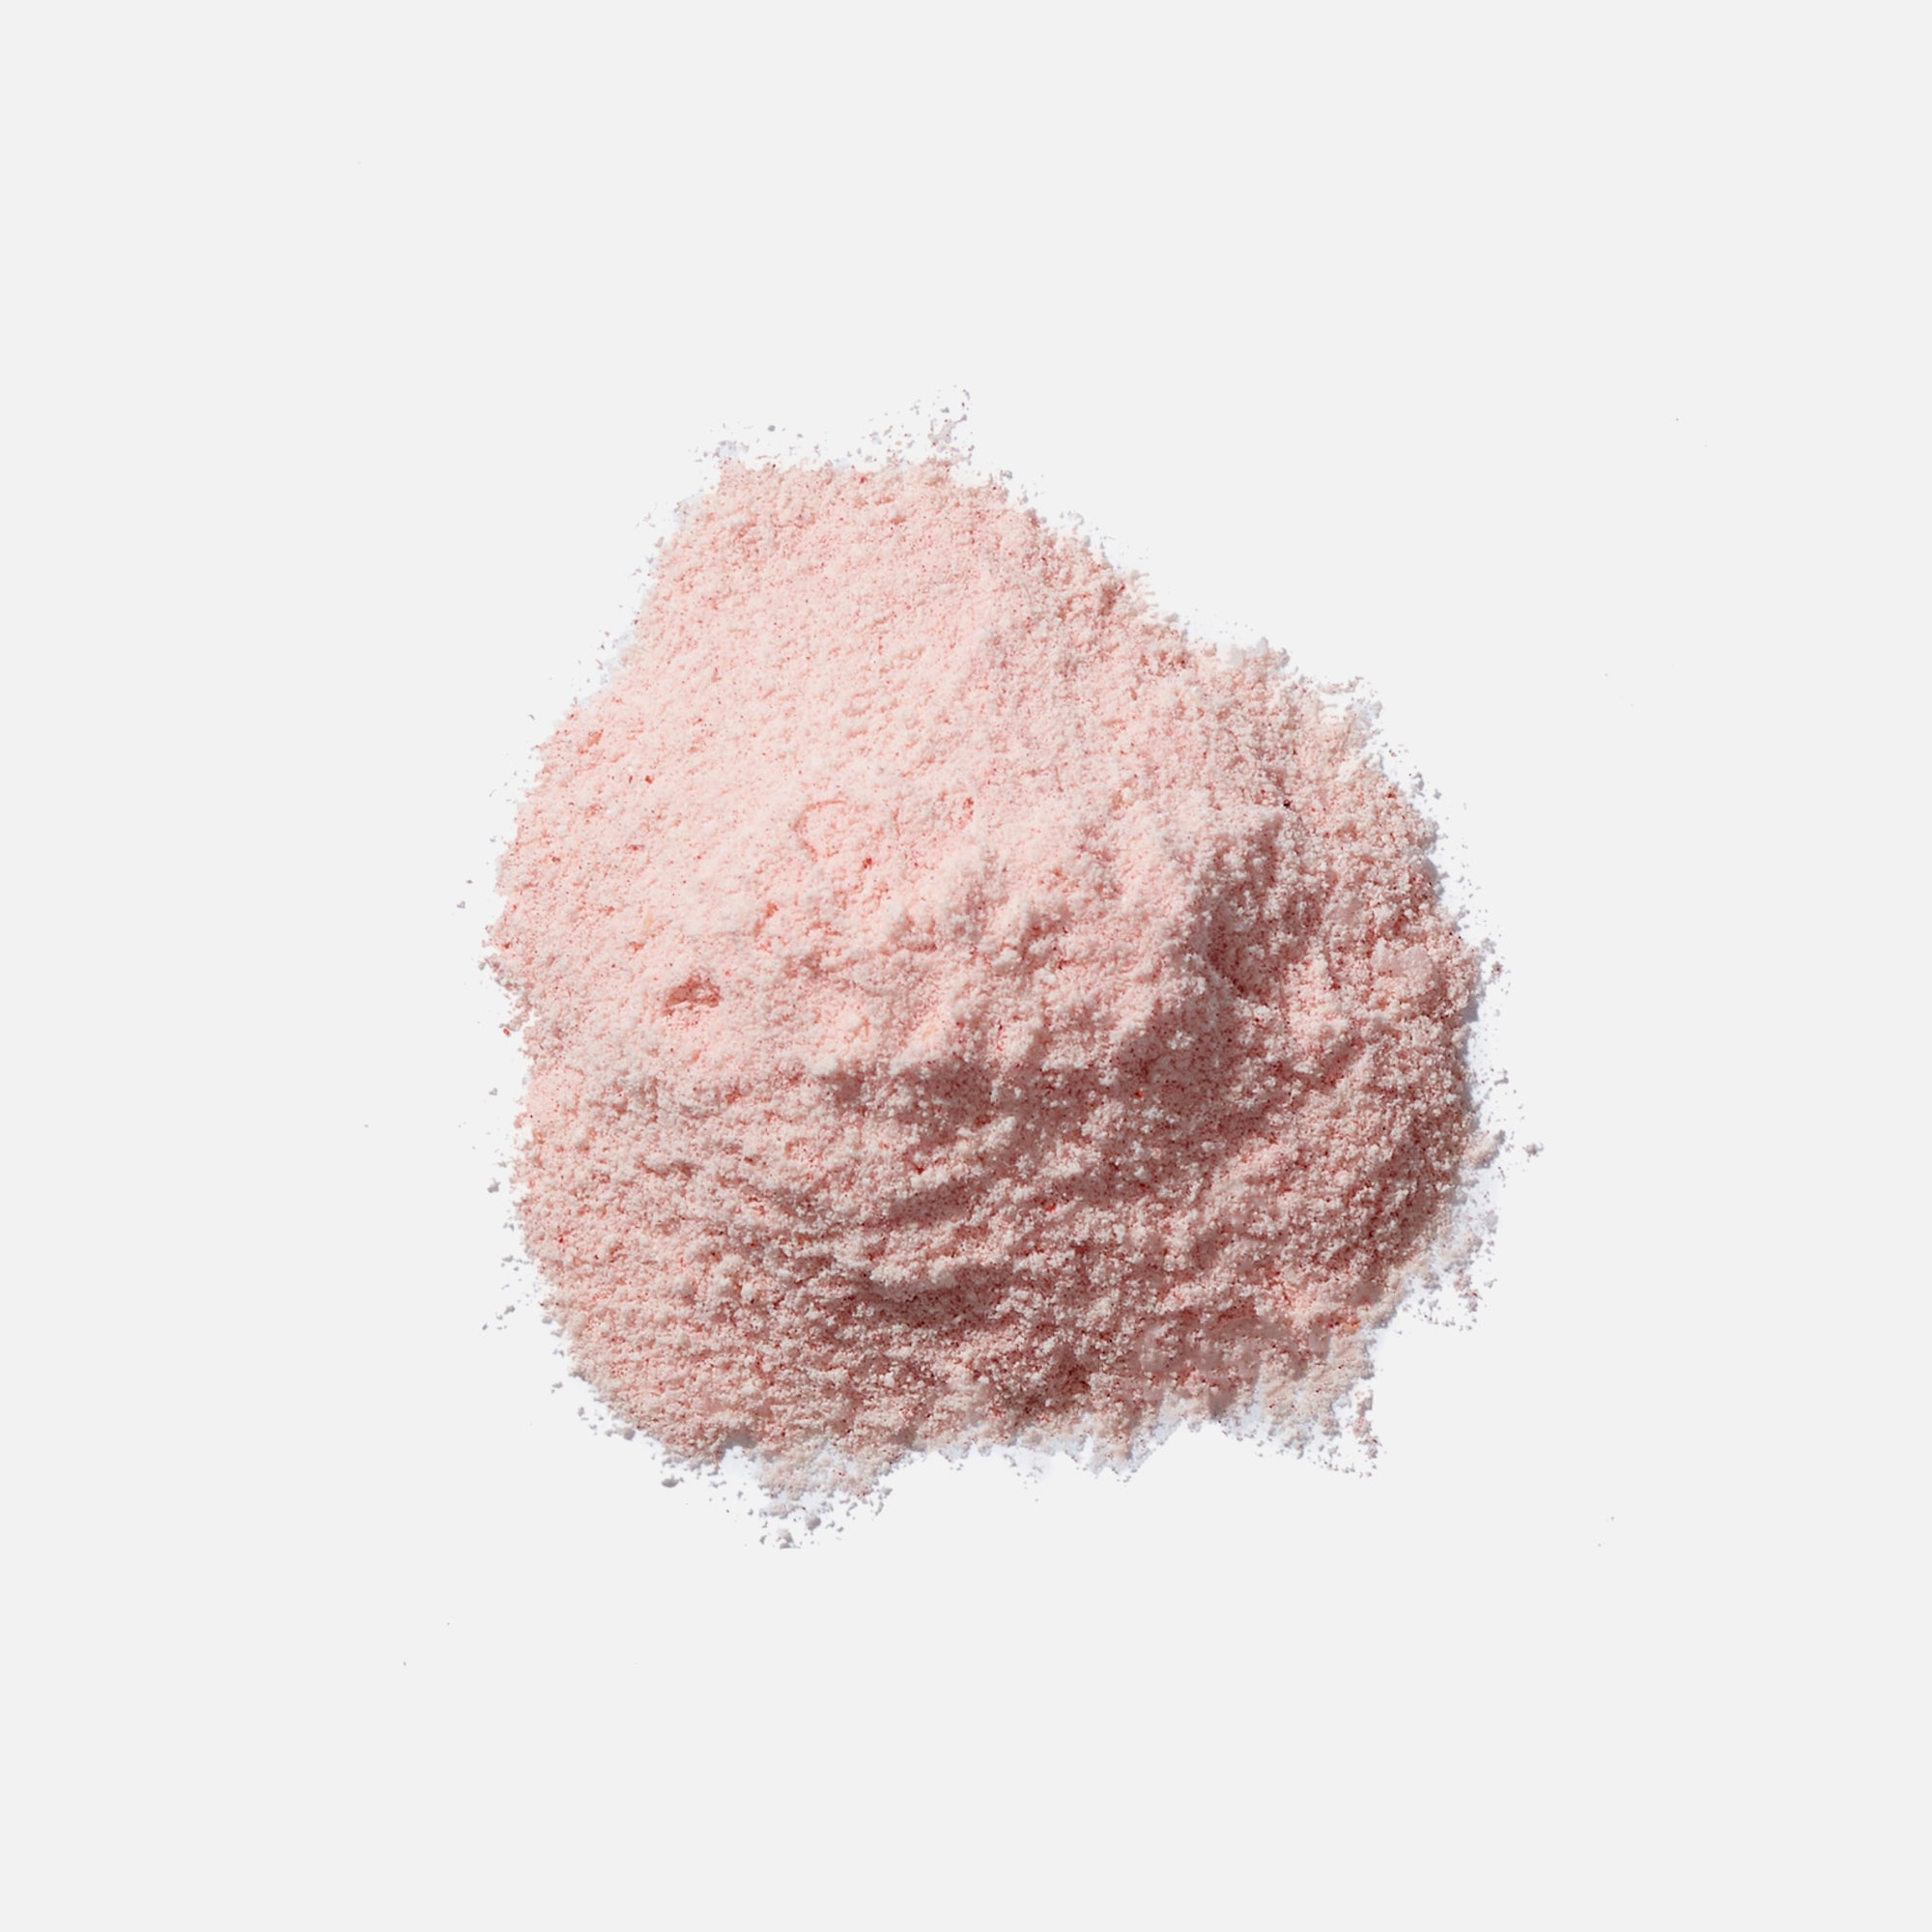 Pile of pink watermelon Colostrum showing texture